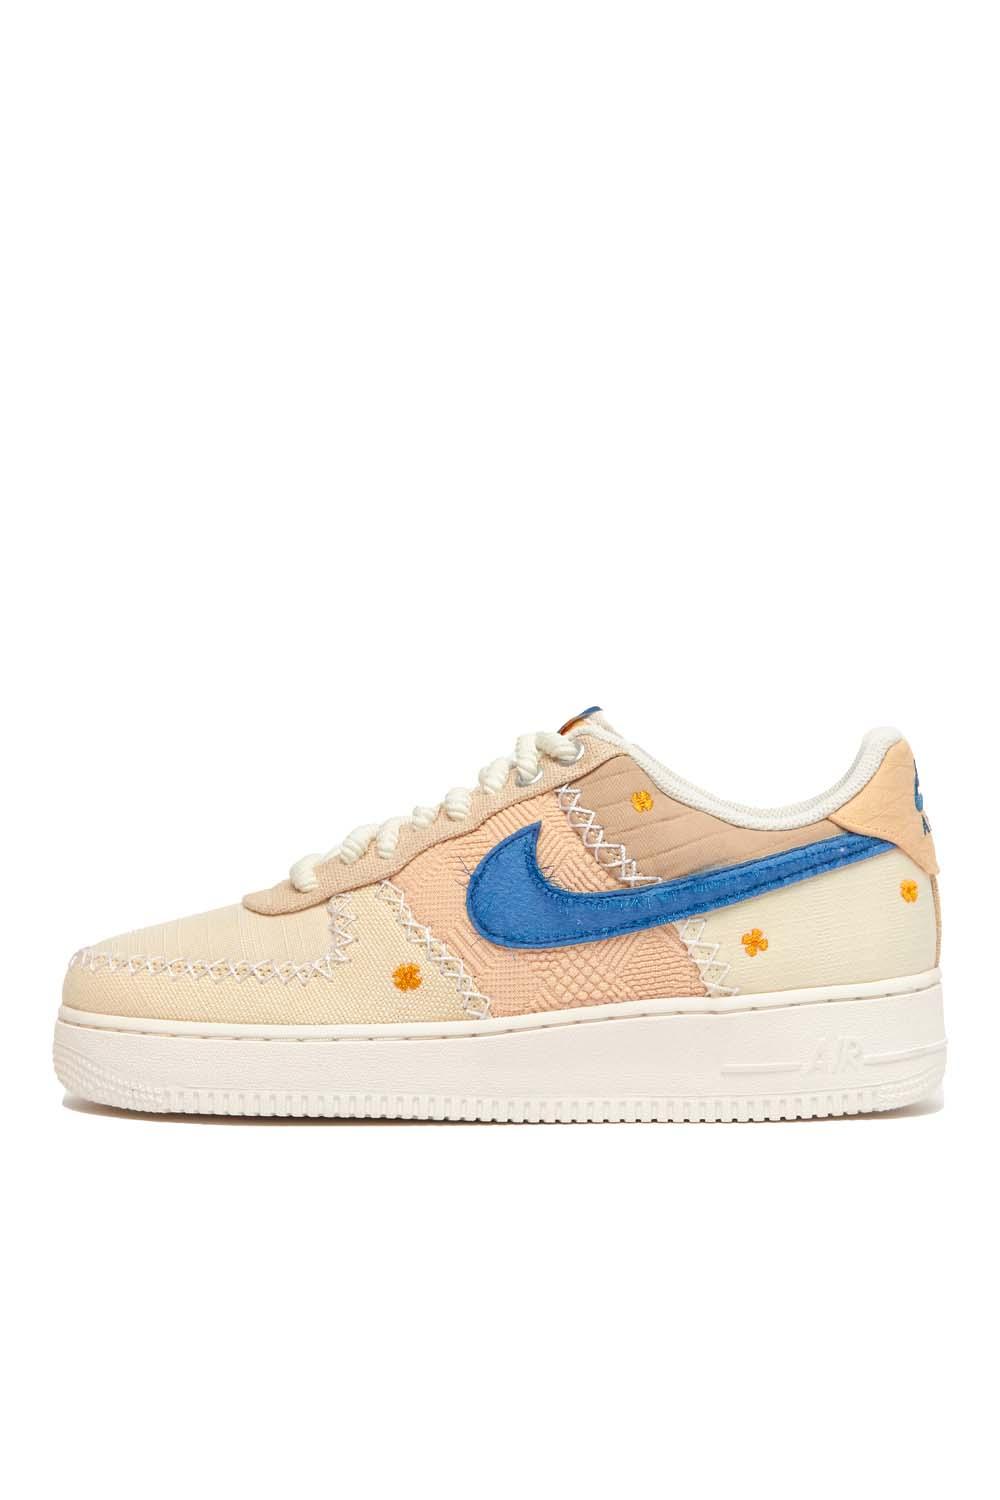 Nike Air Force 1 '07 Prm Shoes for Men | Lyst